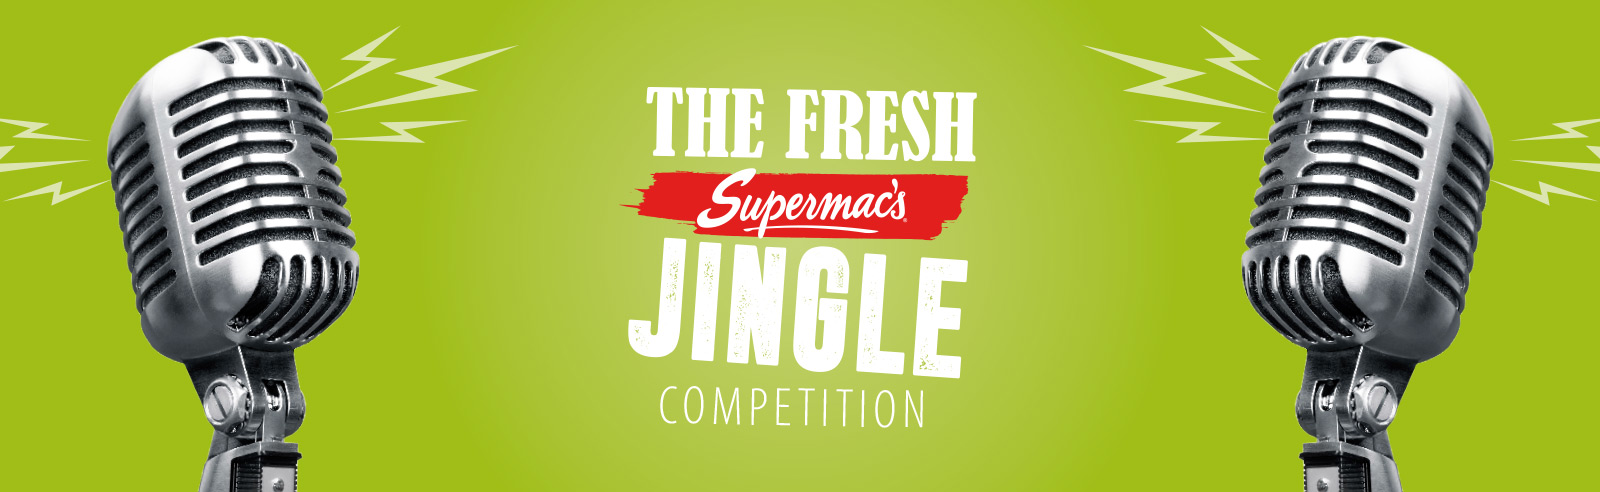 Jingle Competition Terms and Conditions